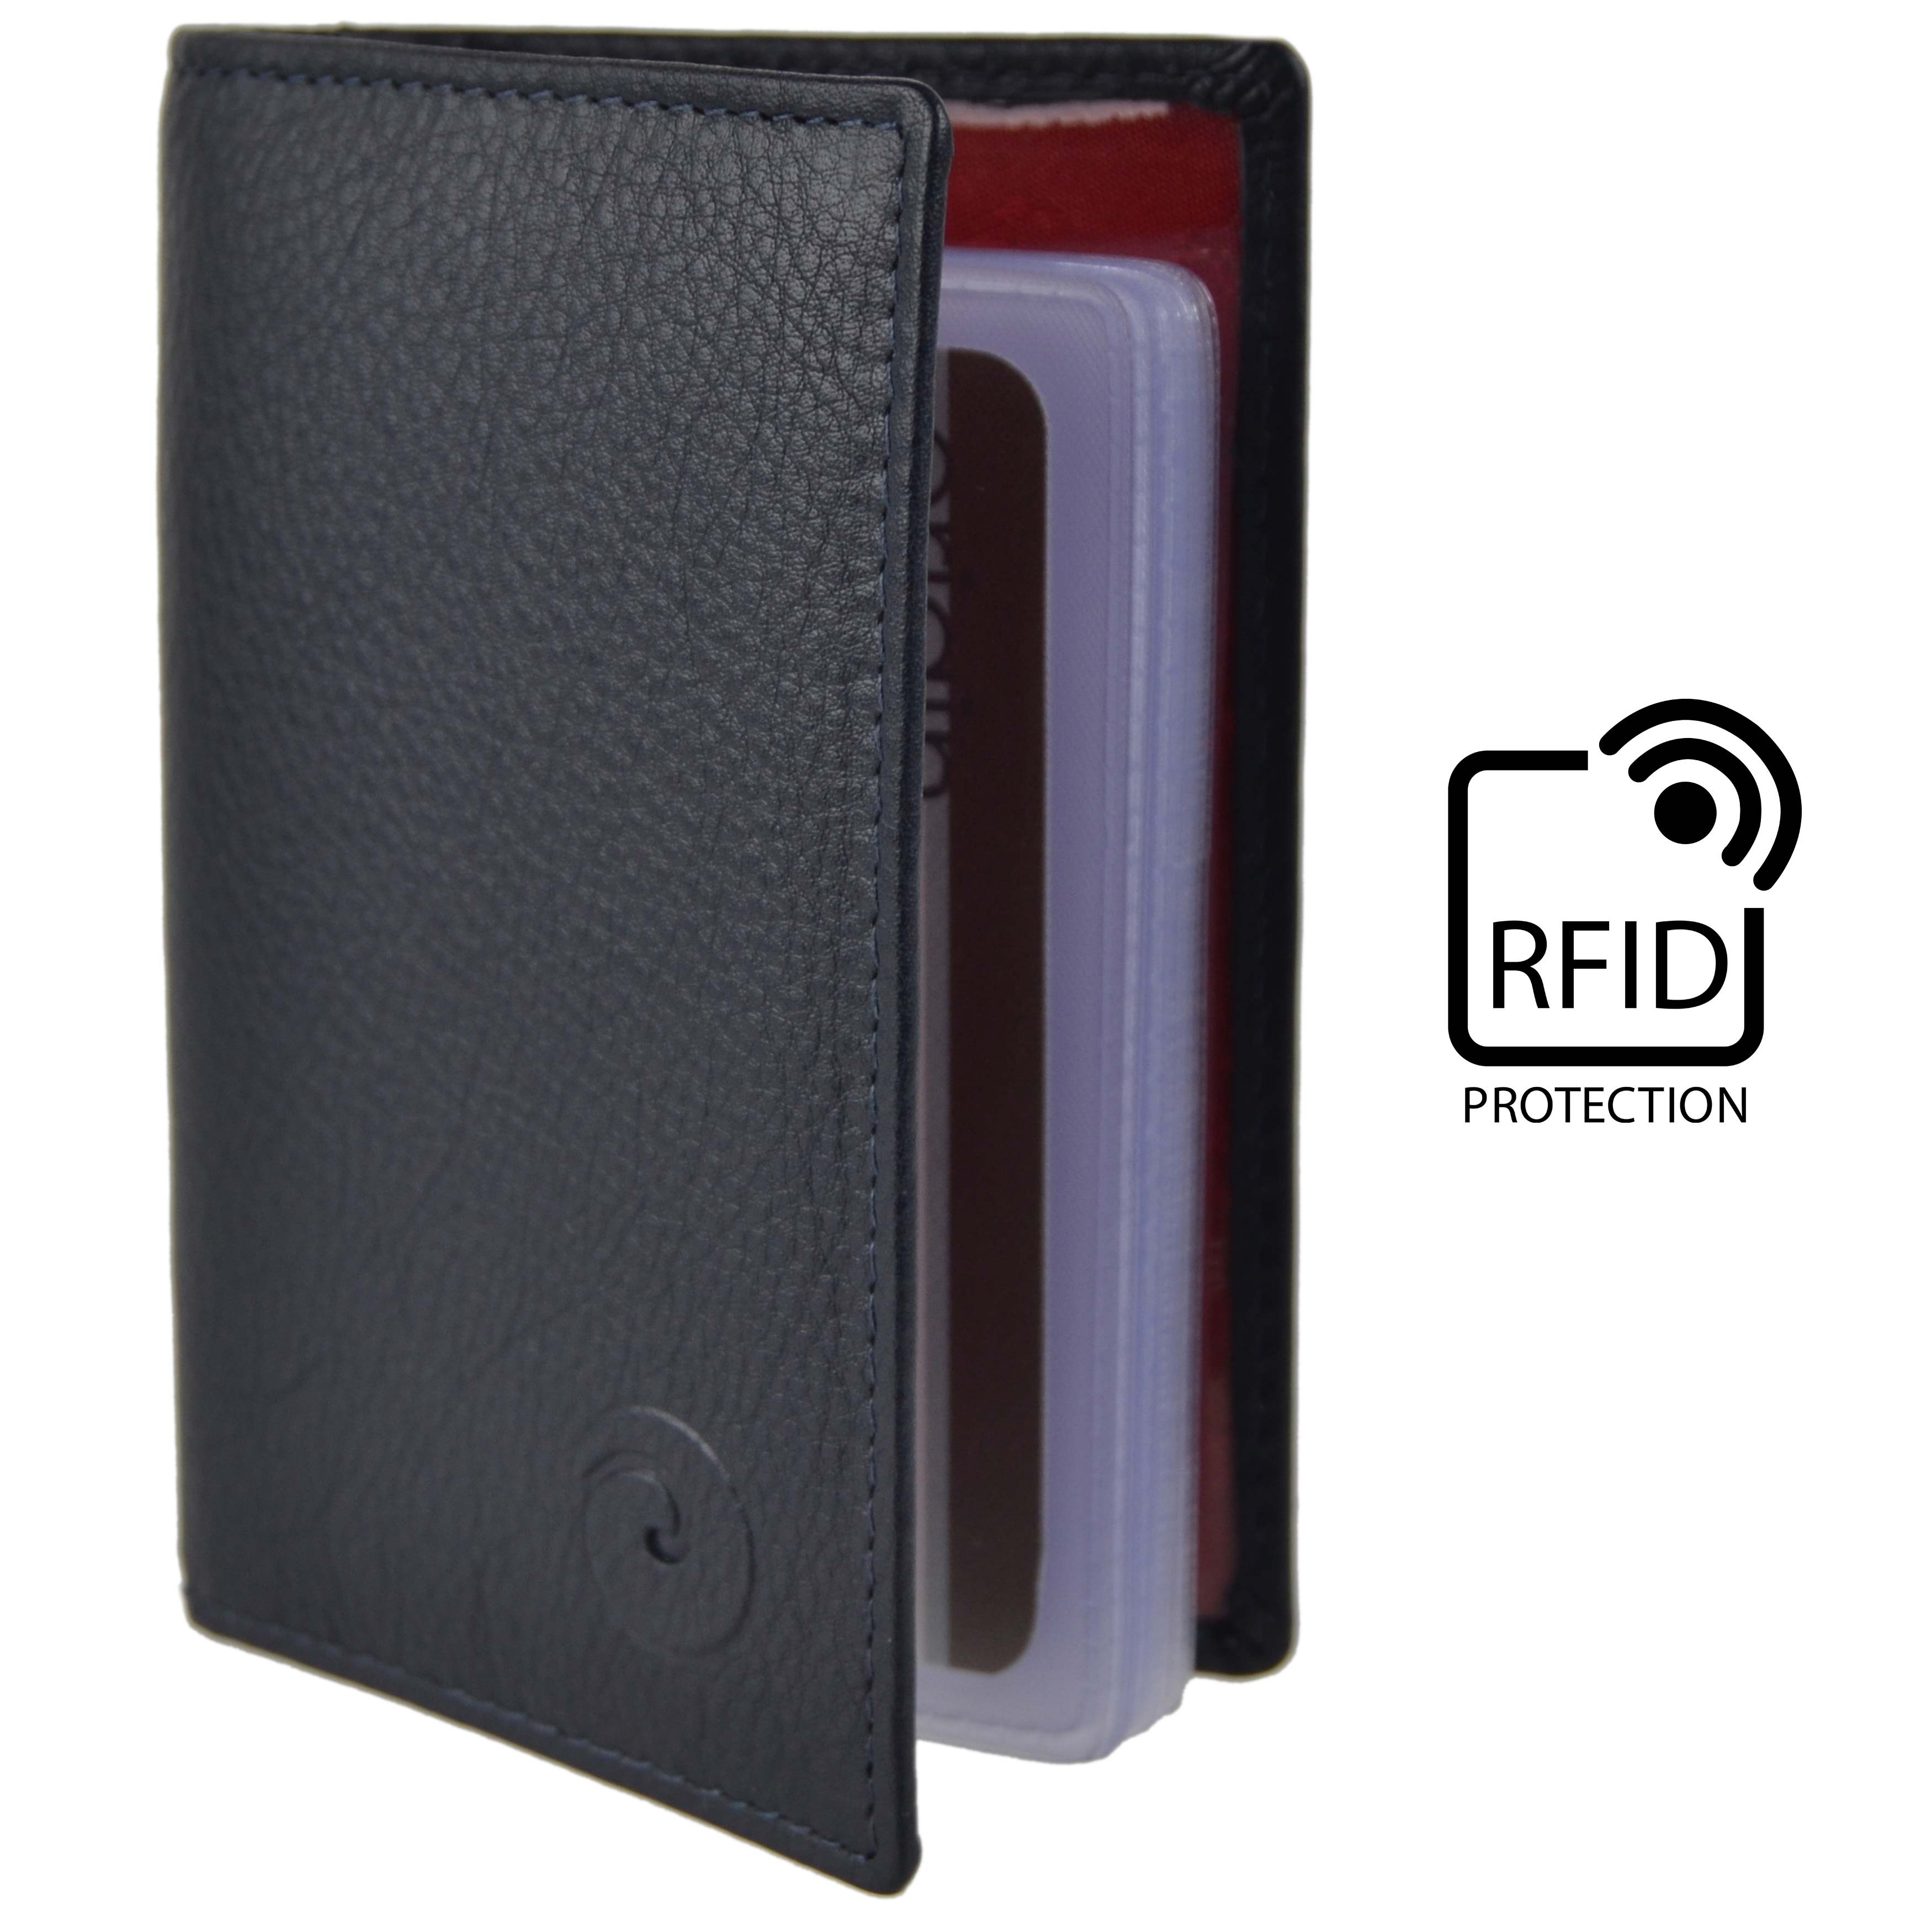 Origin Compact Credit Card Holder Purse Wallet Mala Leather RFID Protected 